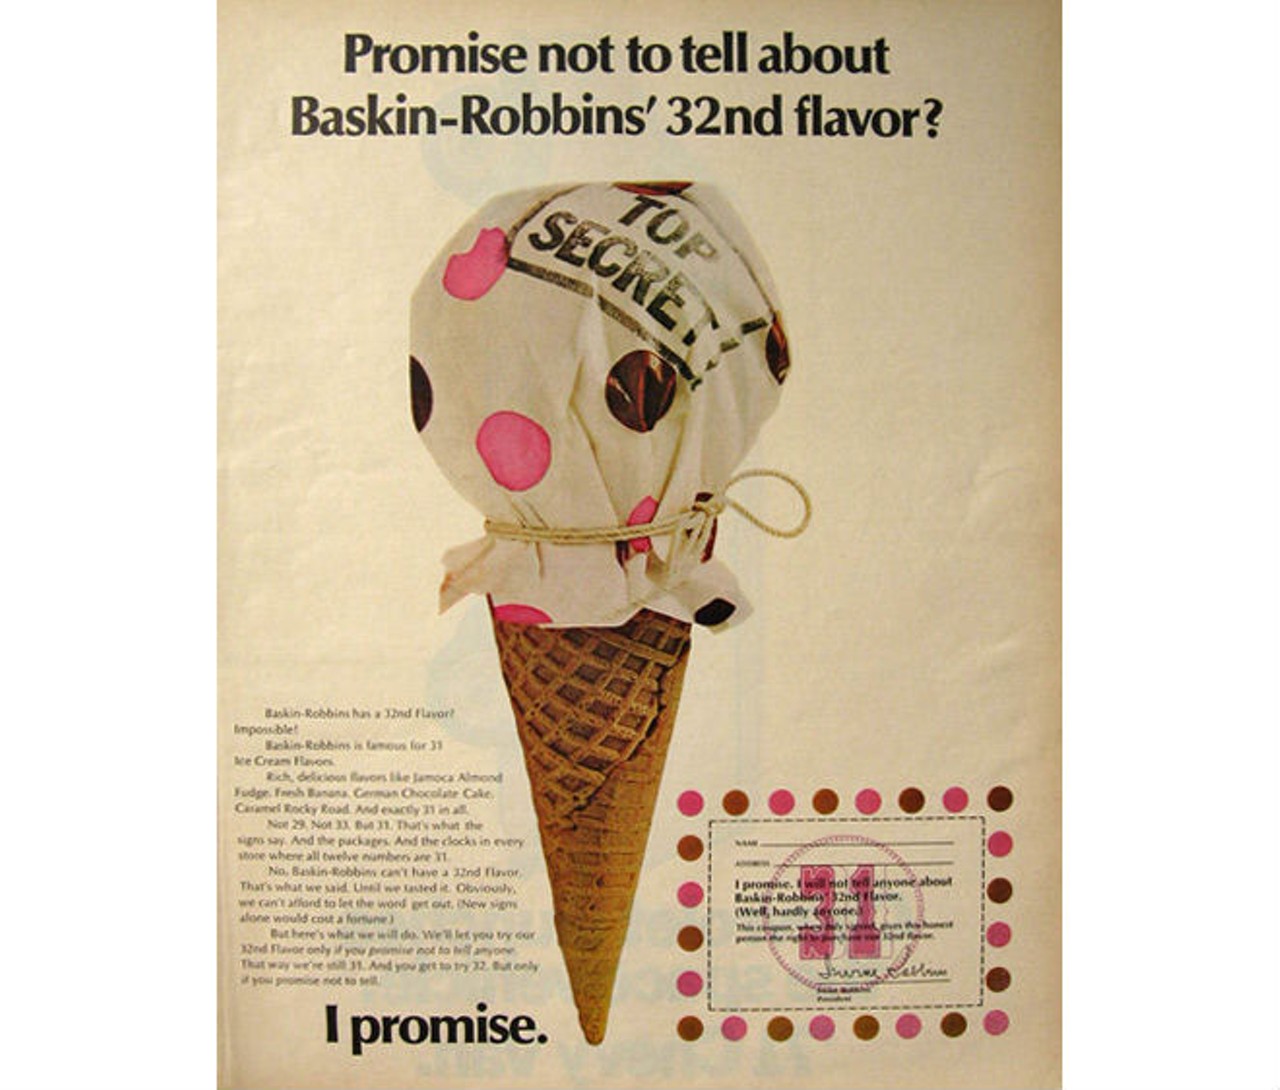 In 1970, Baskin-Robbins allowed customers to buy super-secret 32nd flavor, but only if they had a coupon and promised not to tell what it was. via Attic Paper